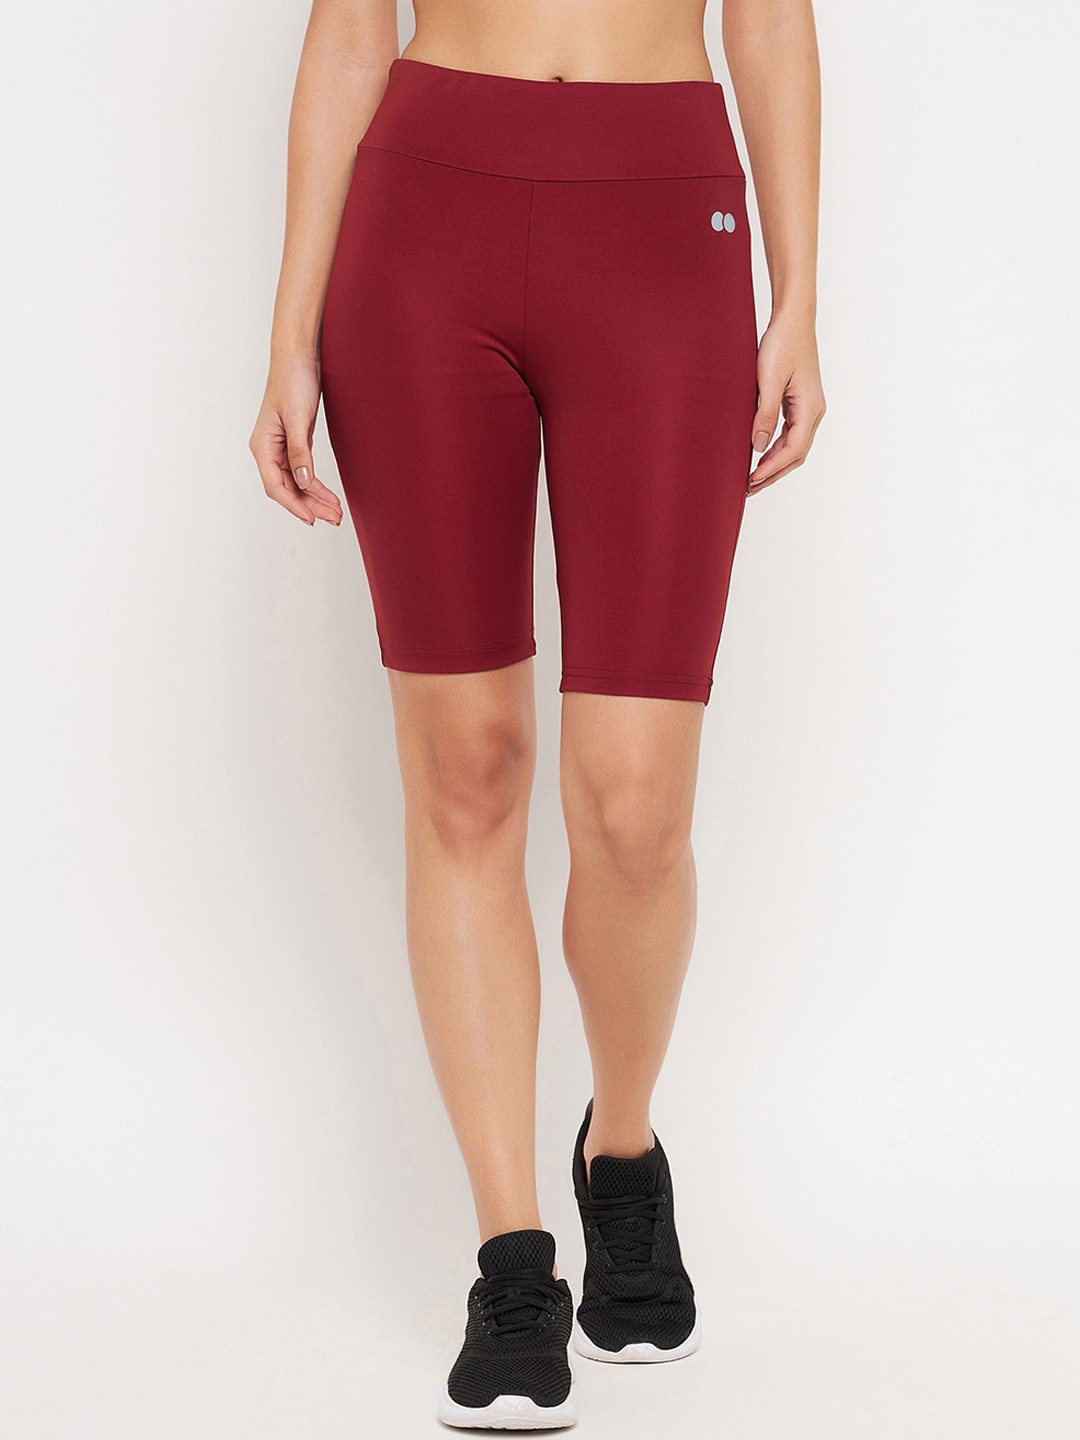 Clovia Women Maroon Slim Fit High-Rise Training or Gym Sports Shorts Price in India